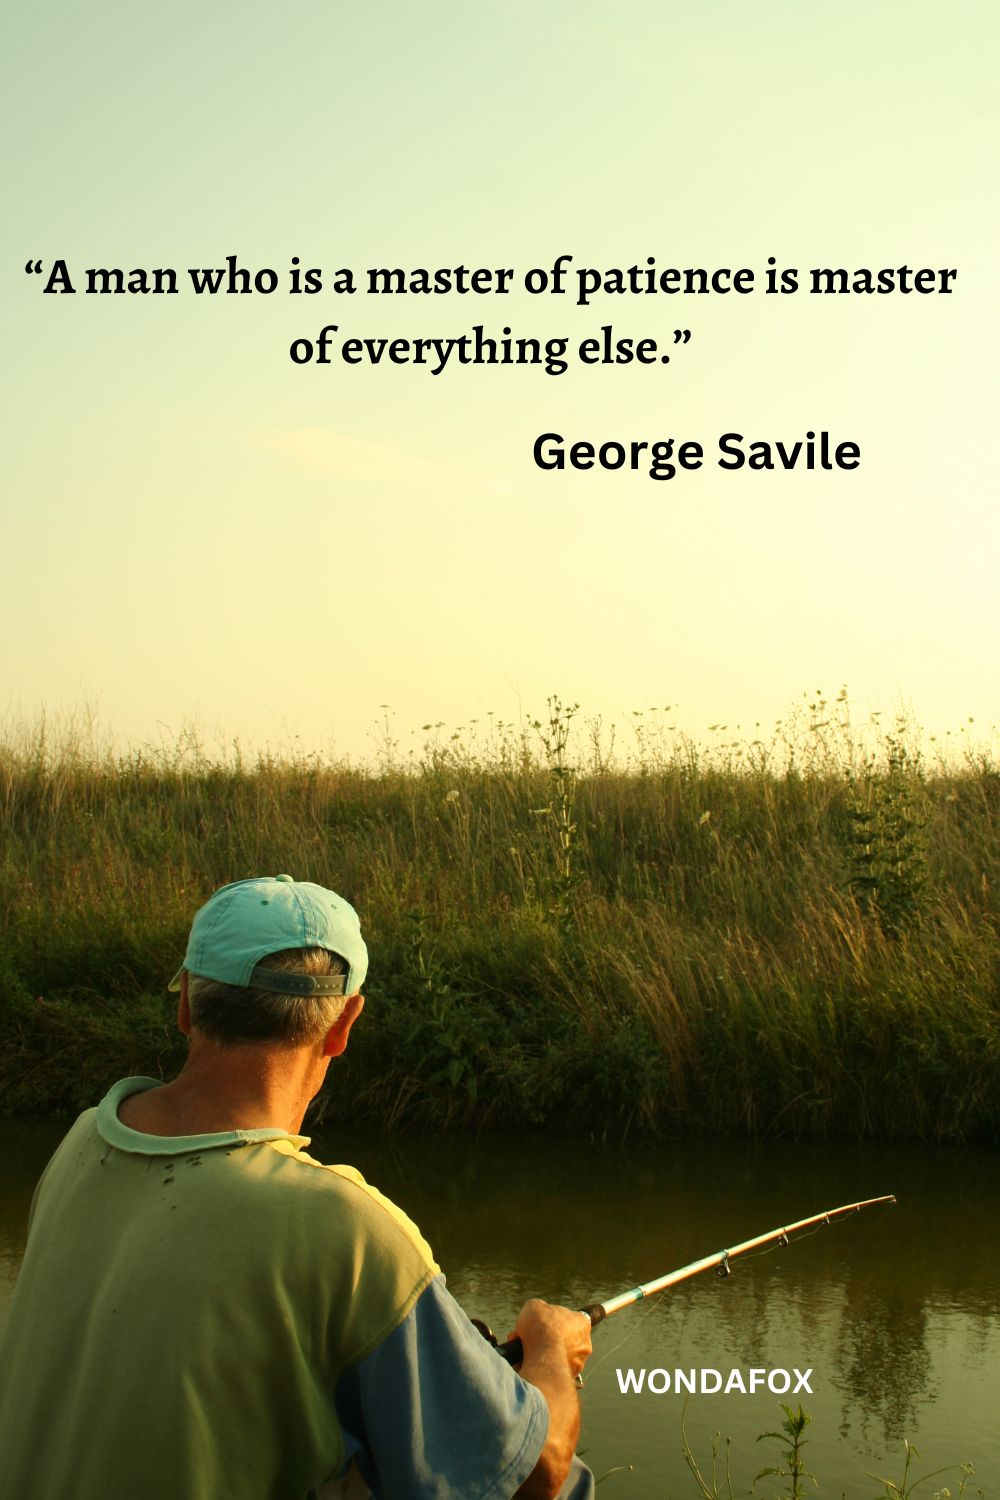 “A man who is a master of patience is master of everything else.
George Savile